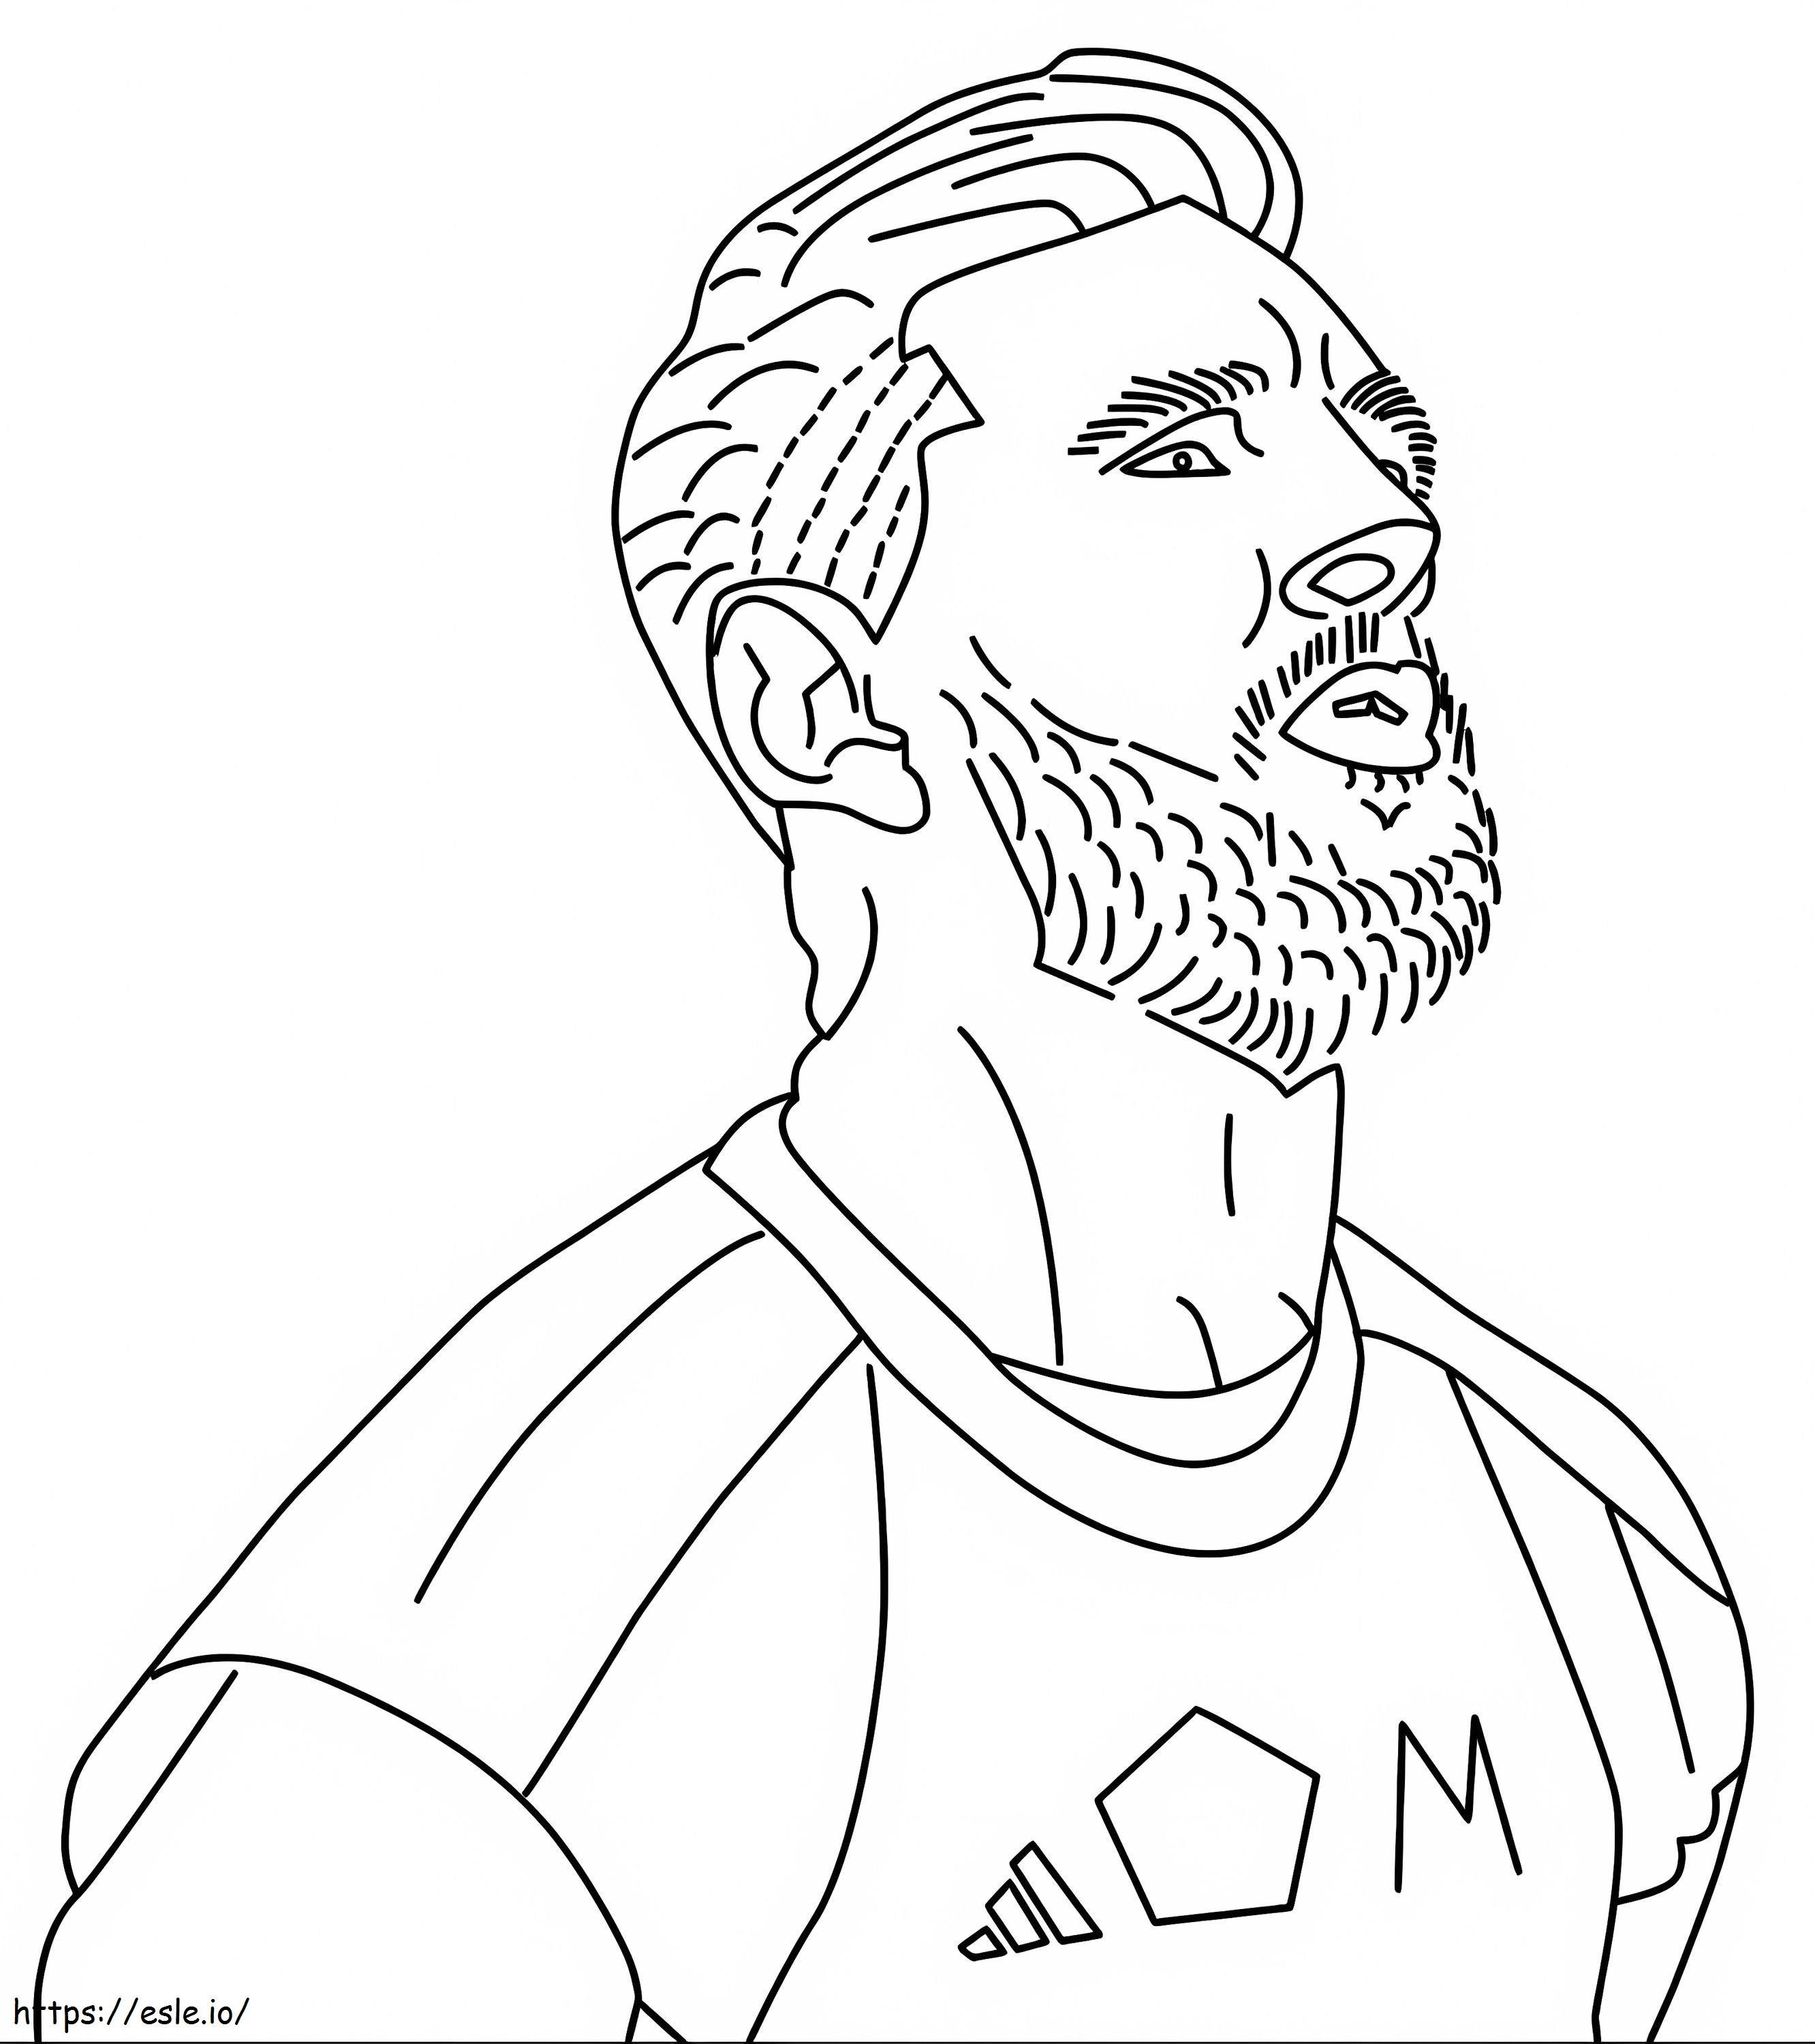 Cool Messi coloring page